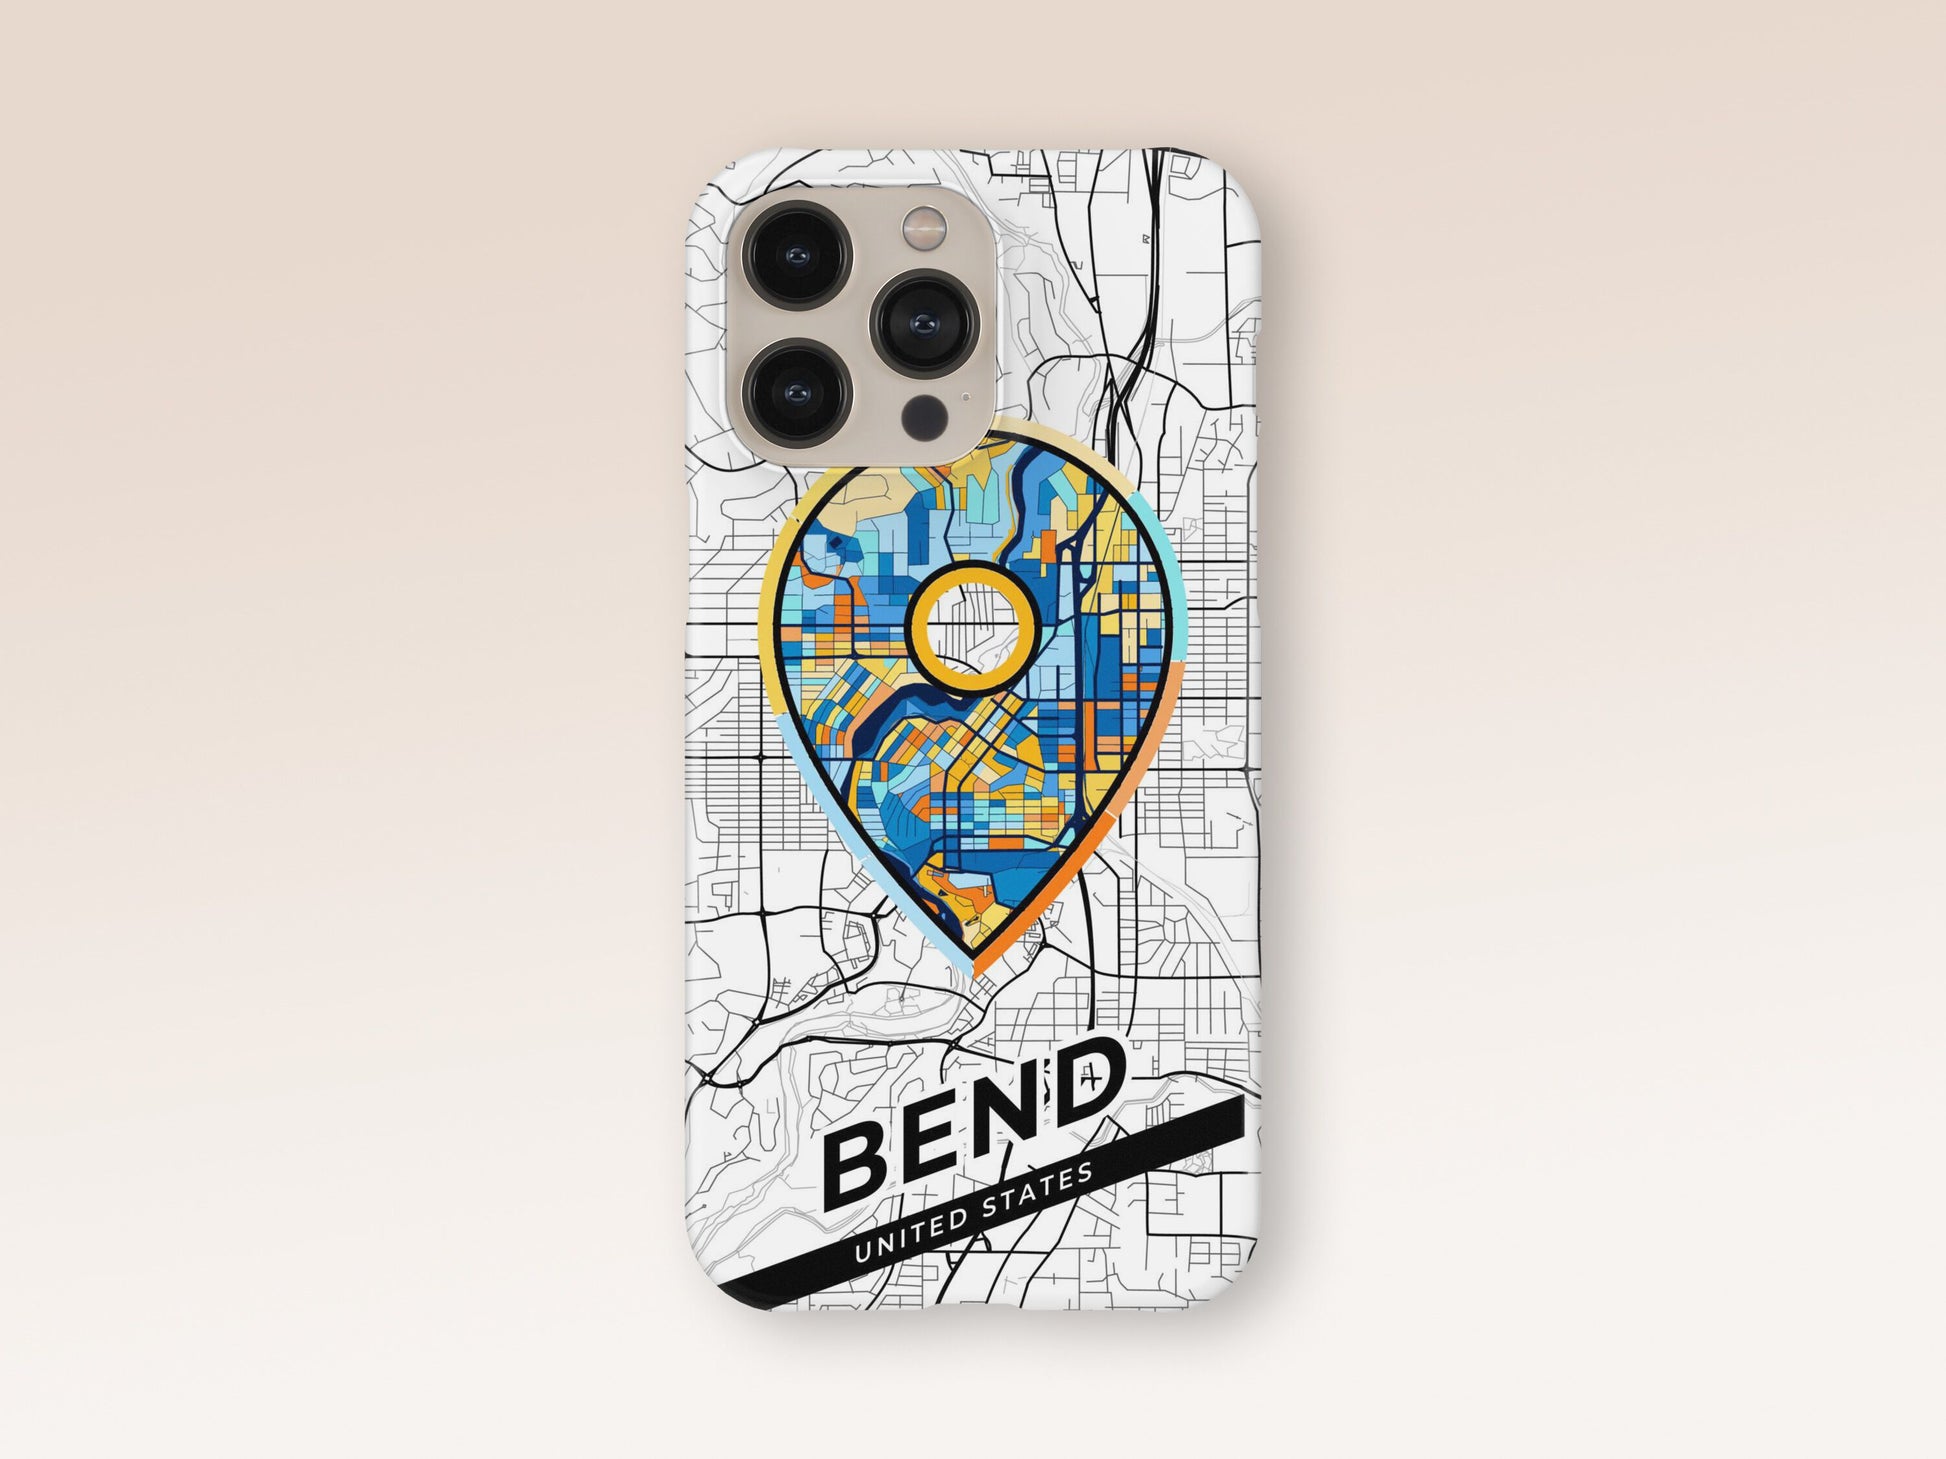 Bend Oregon slim phone case with colorful icon. Birthday, wedding or housewarming gift. Couple match cases. 1